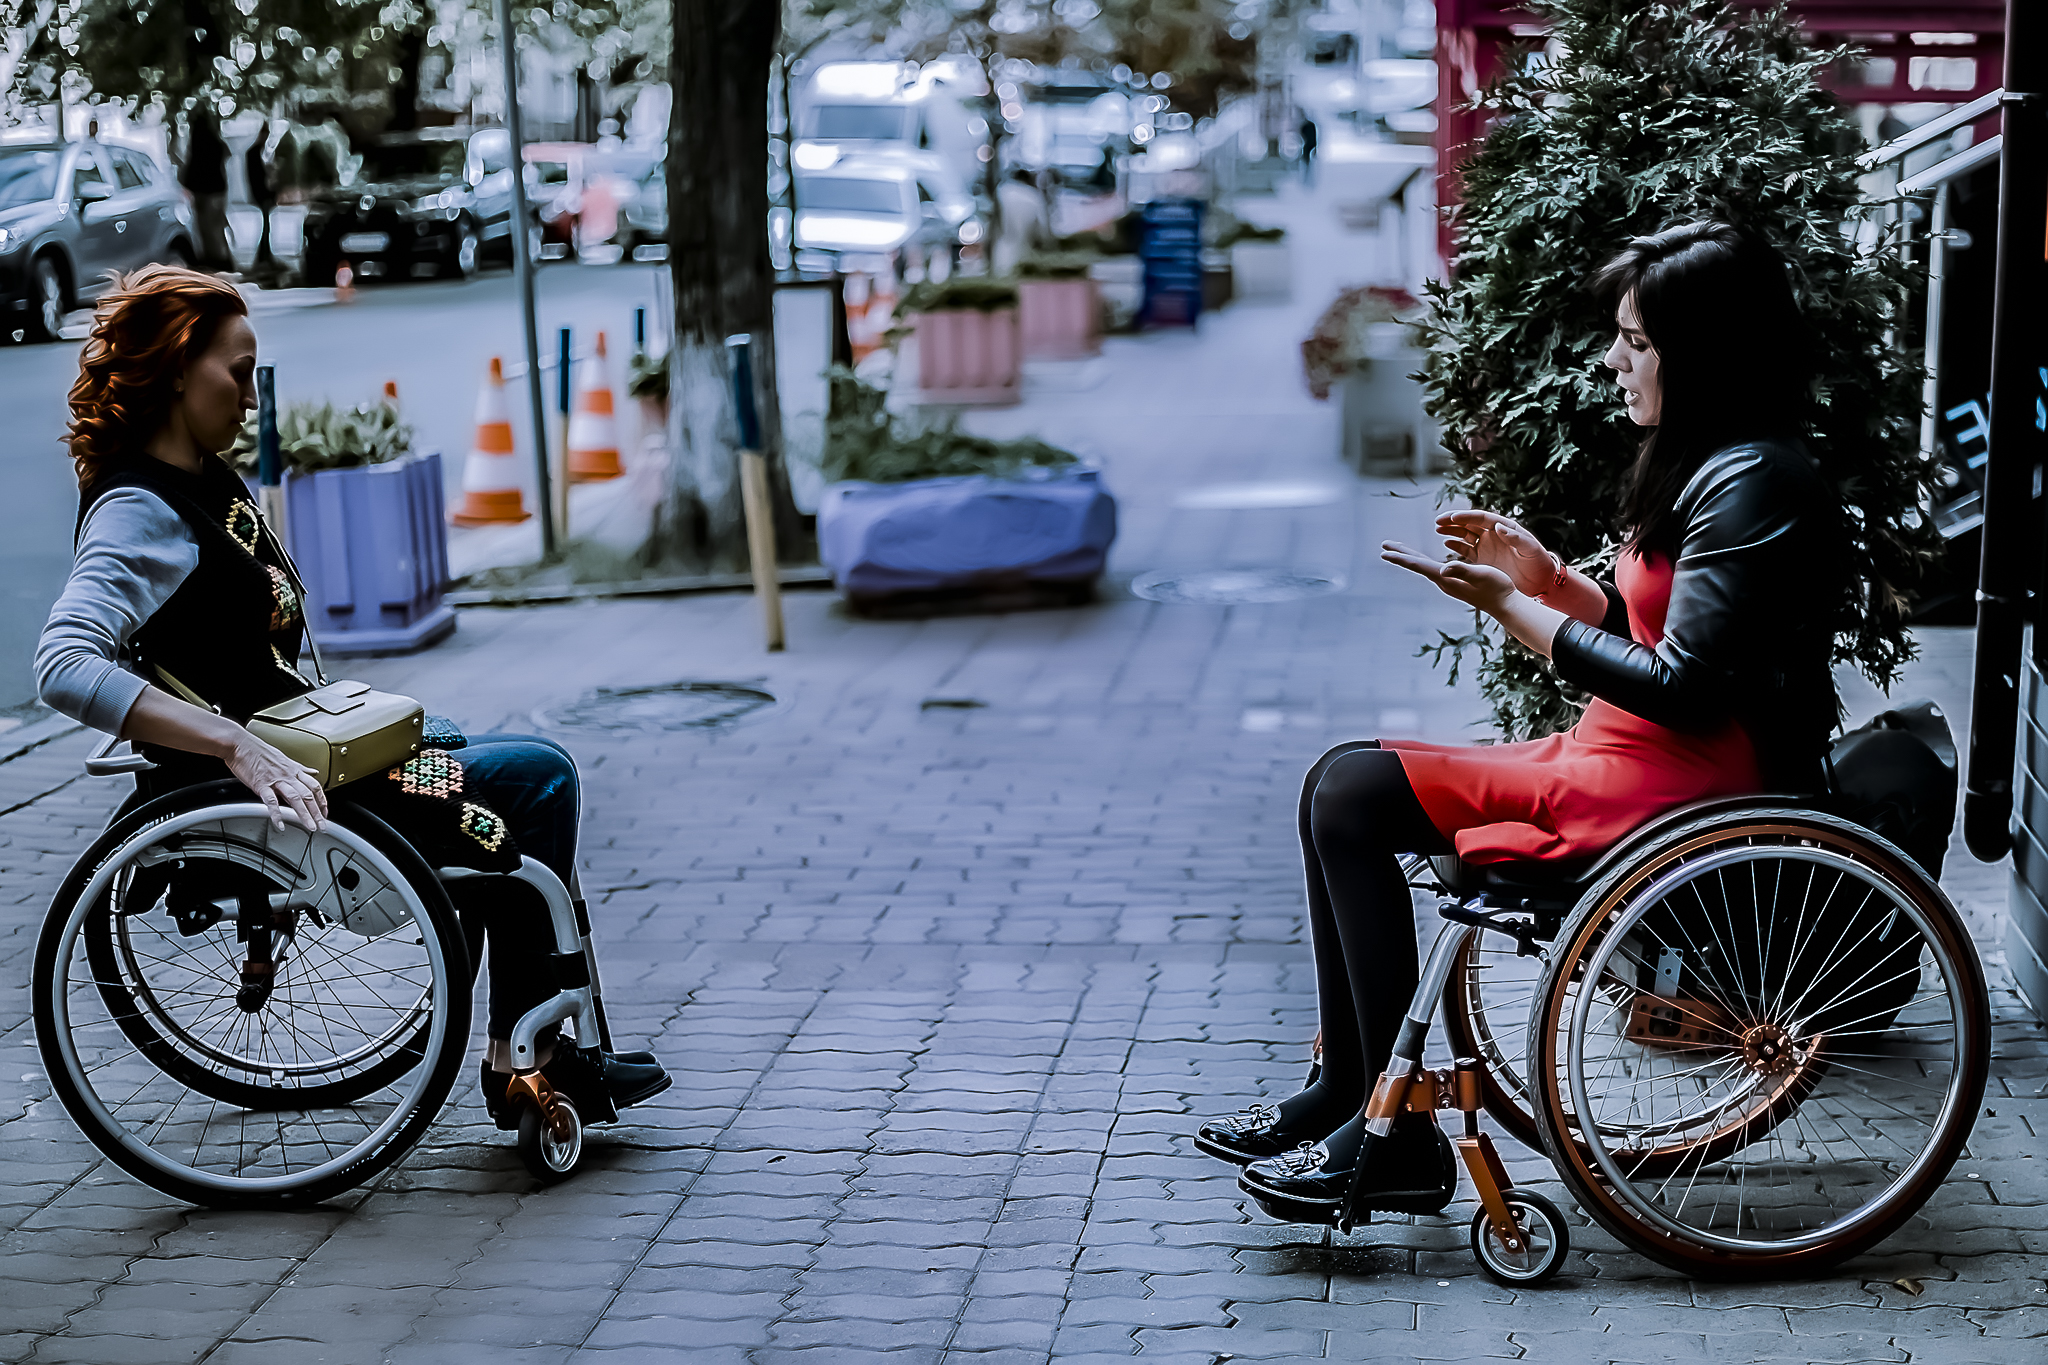 two-girls-in-wheelchairs-travel-through-the-centra-2021-12-03-19-45-07-utc